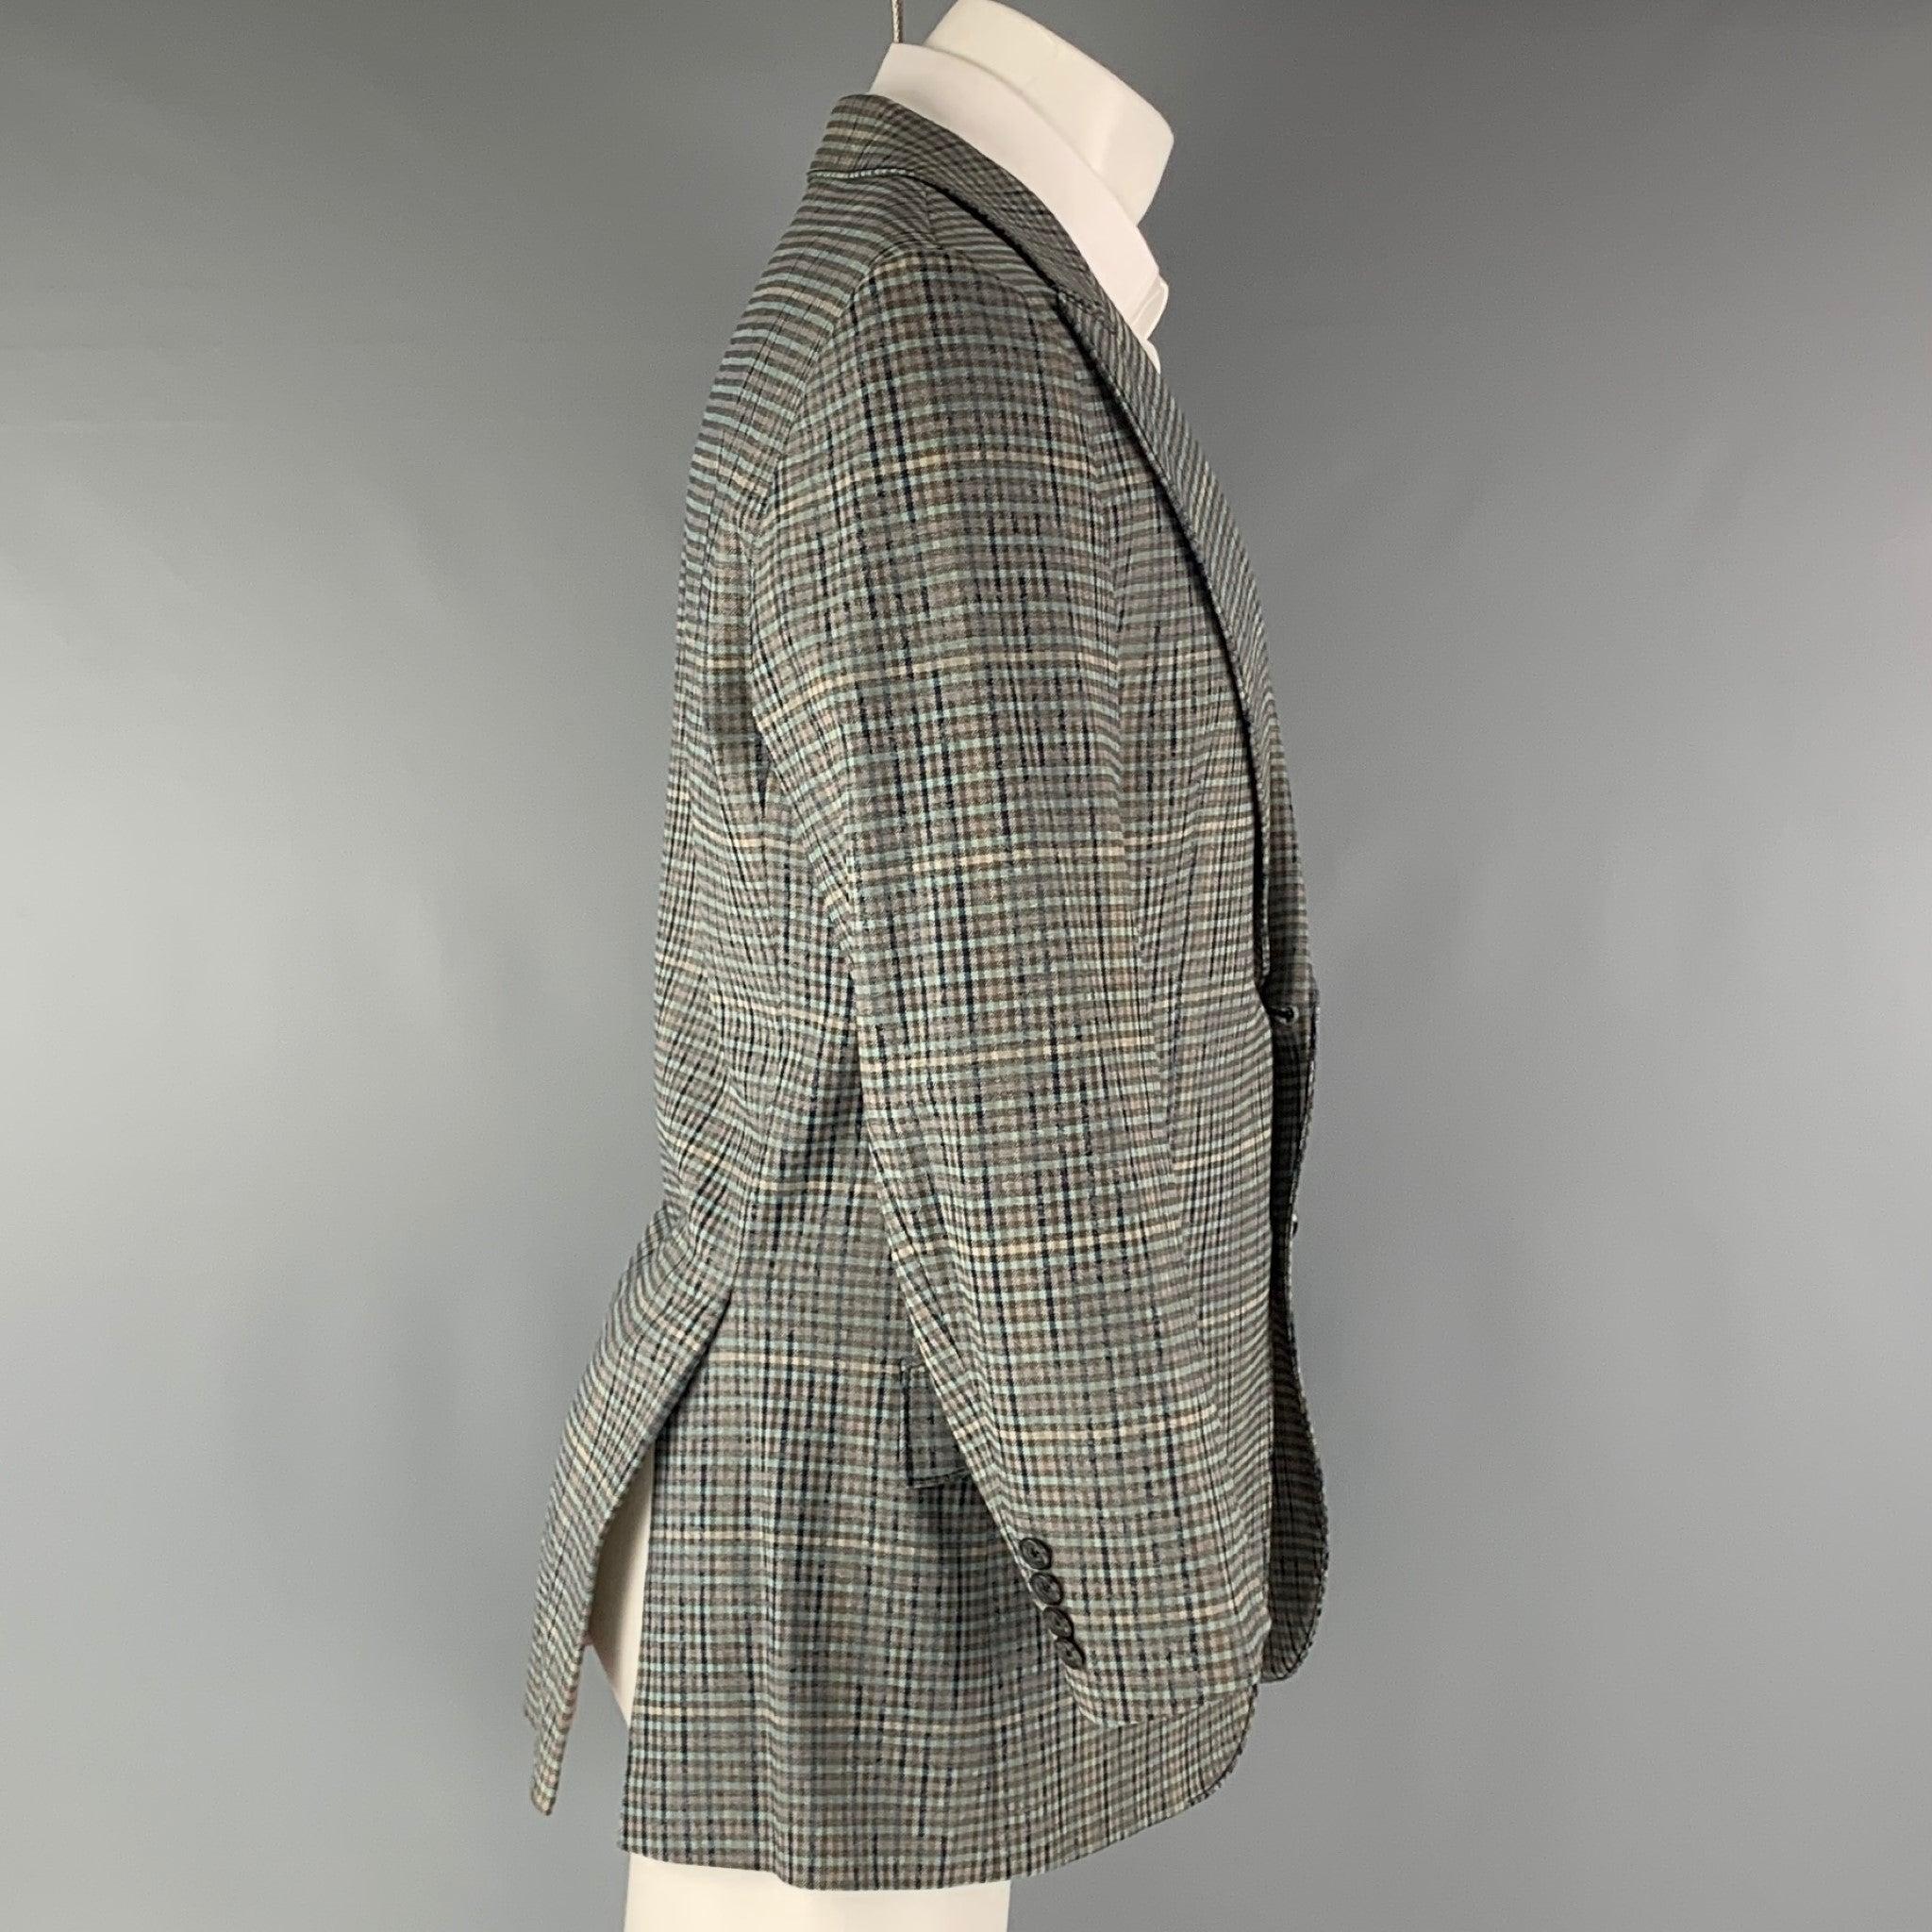 HUGO BOSS Sport Coat comes in a grey and navy plaid cotton elastane woven material, with a peak lapel, flap pockets, two buttons at closure, double vent at back and buttoned cuffs. Very Good Pre-Owned Condition. Minor mark at lining right side.